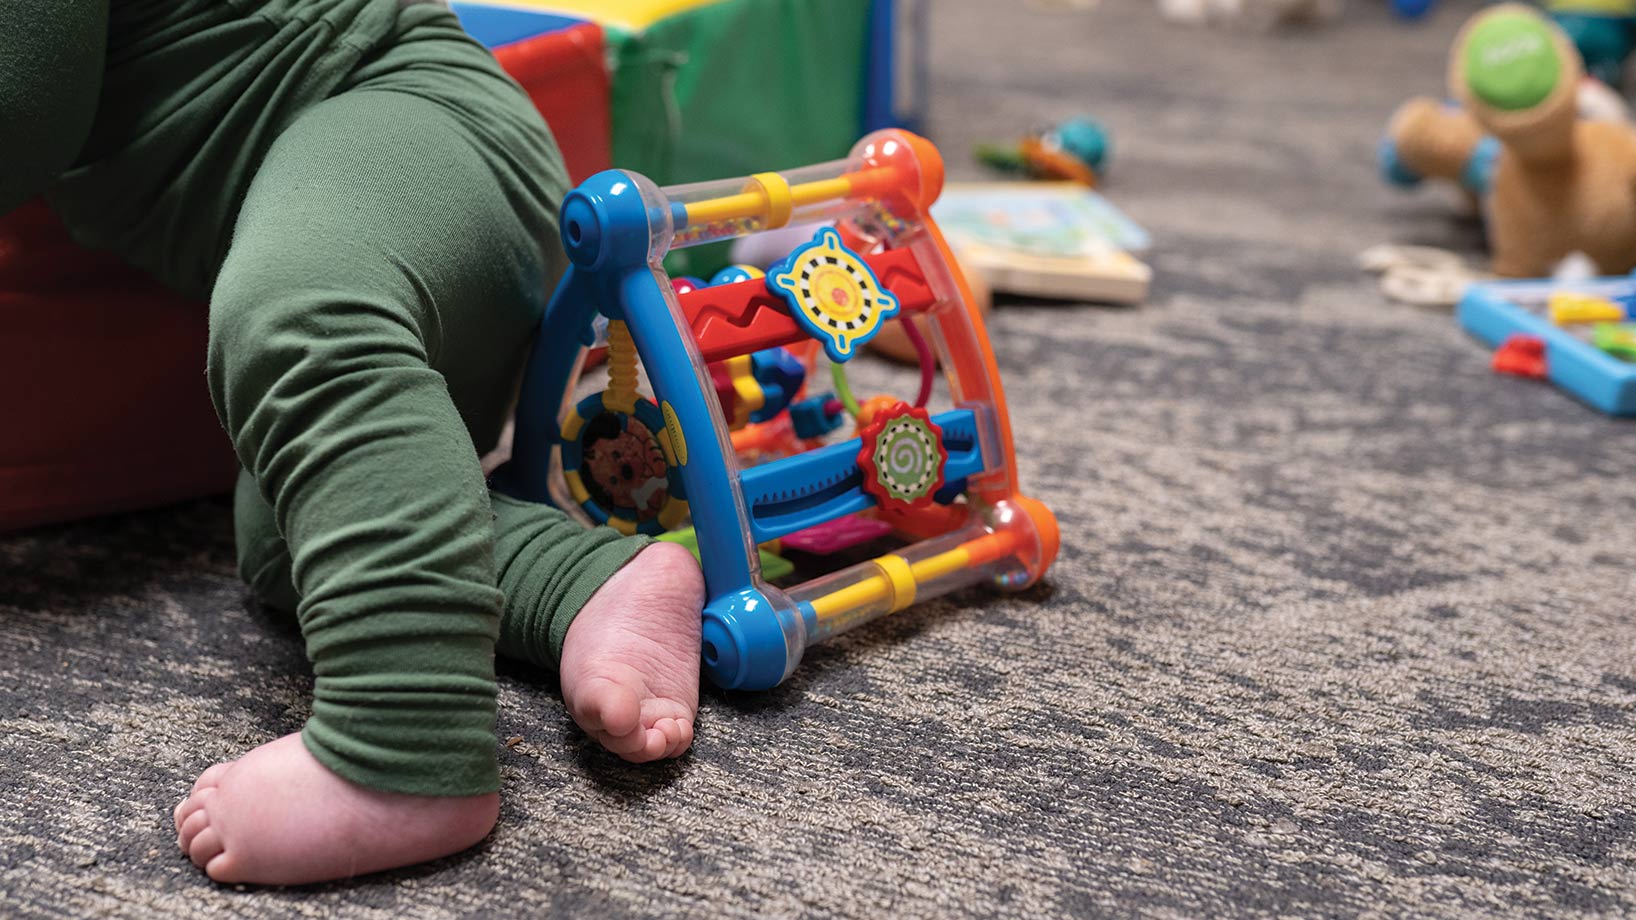 Baby feet next to a colorful toy